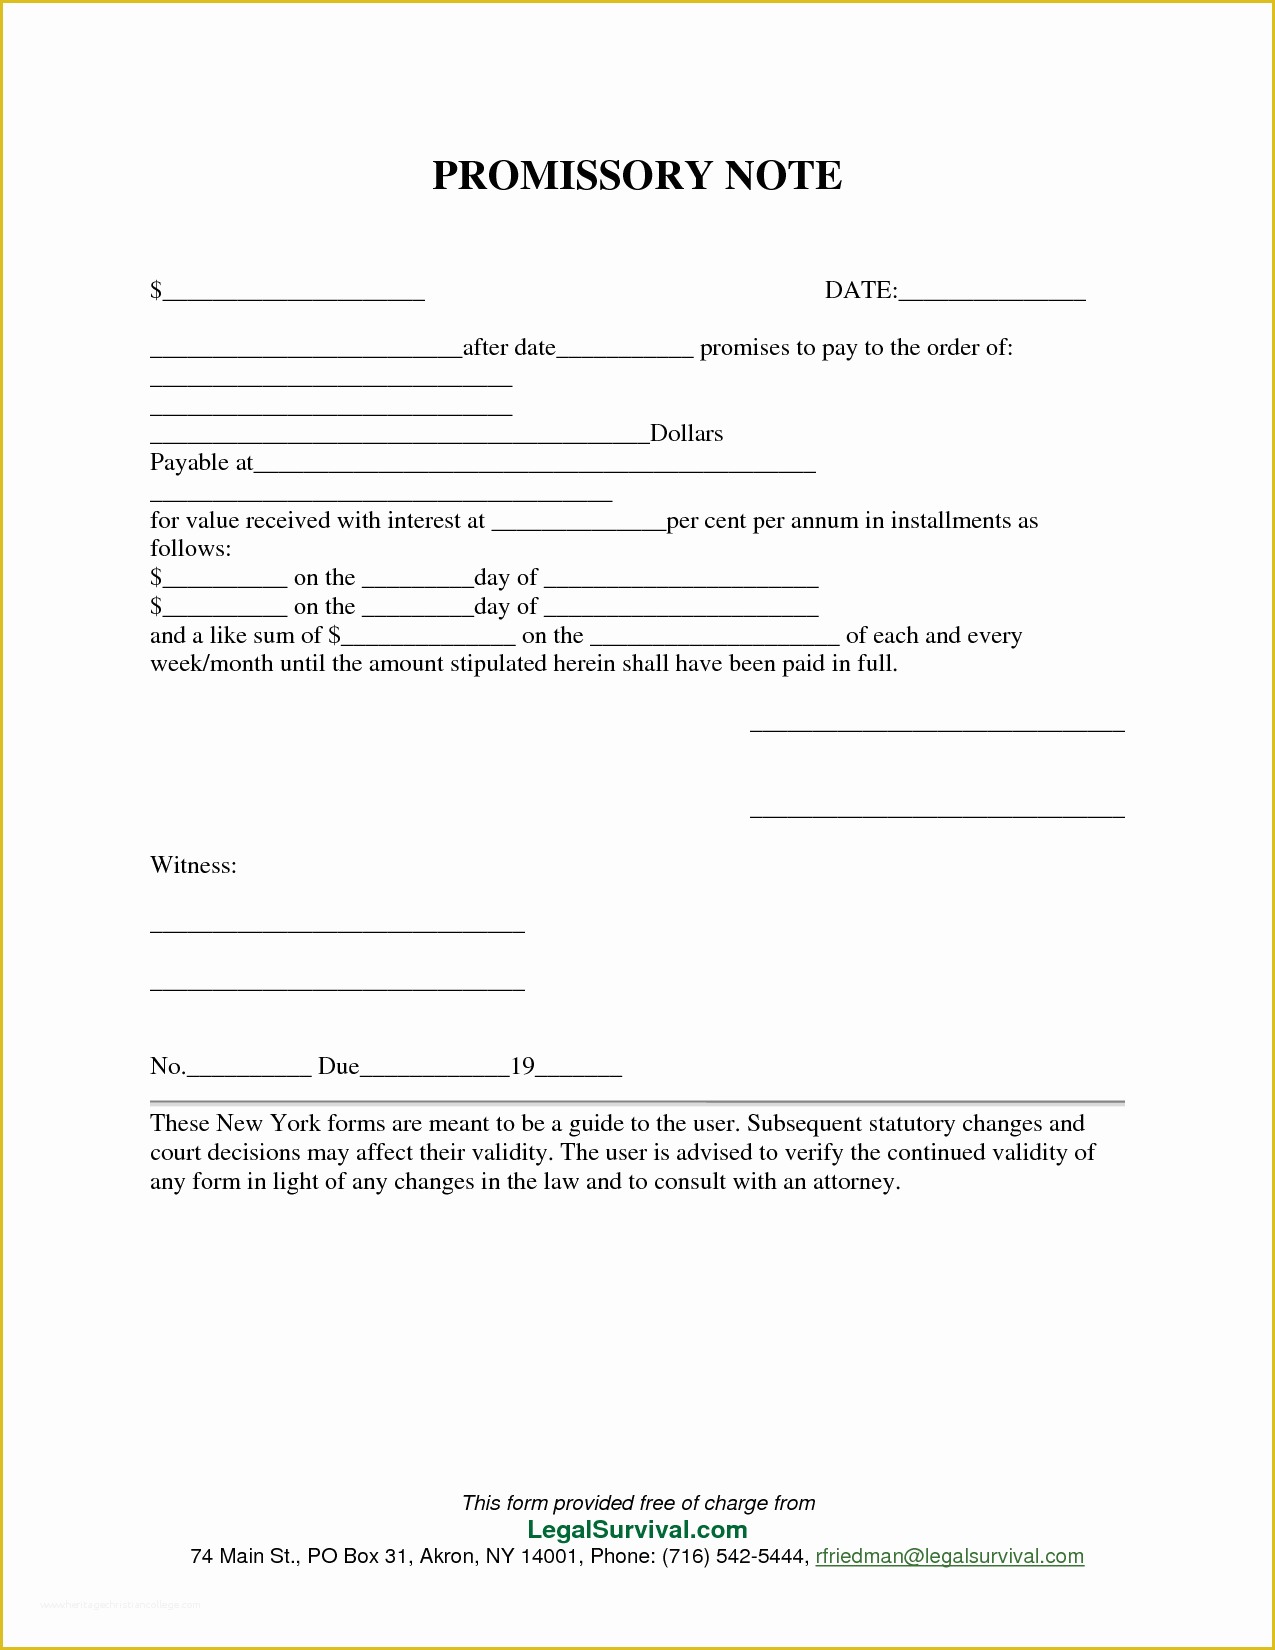 Free Online Promissory Note Template Of Permalink to Free Promissory Note Template …